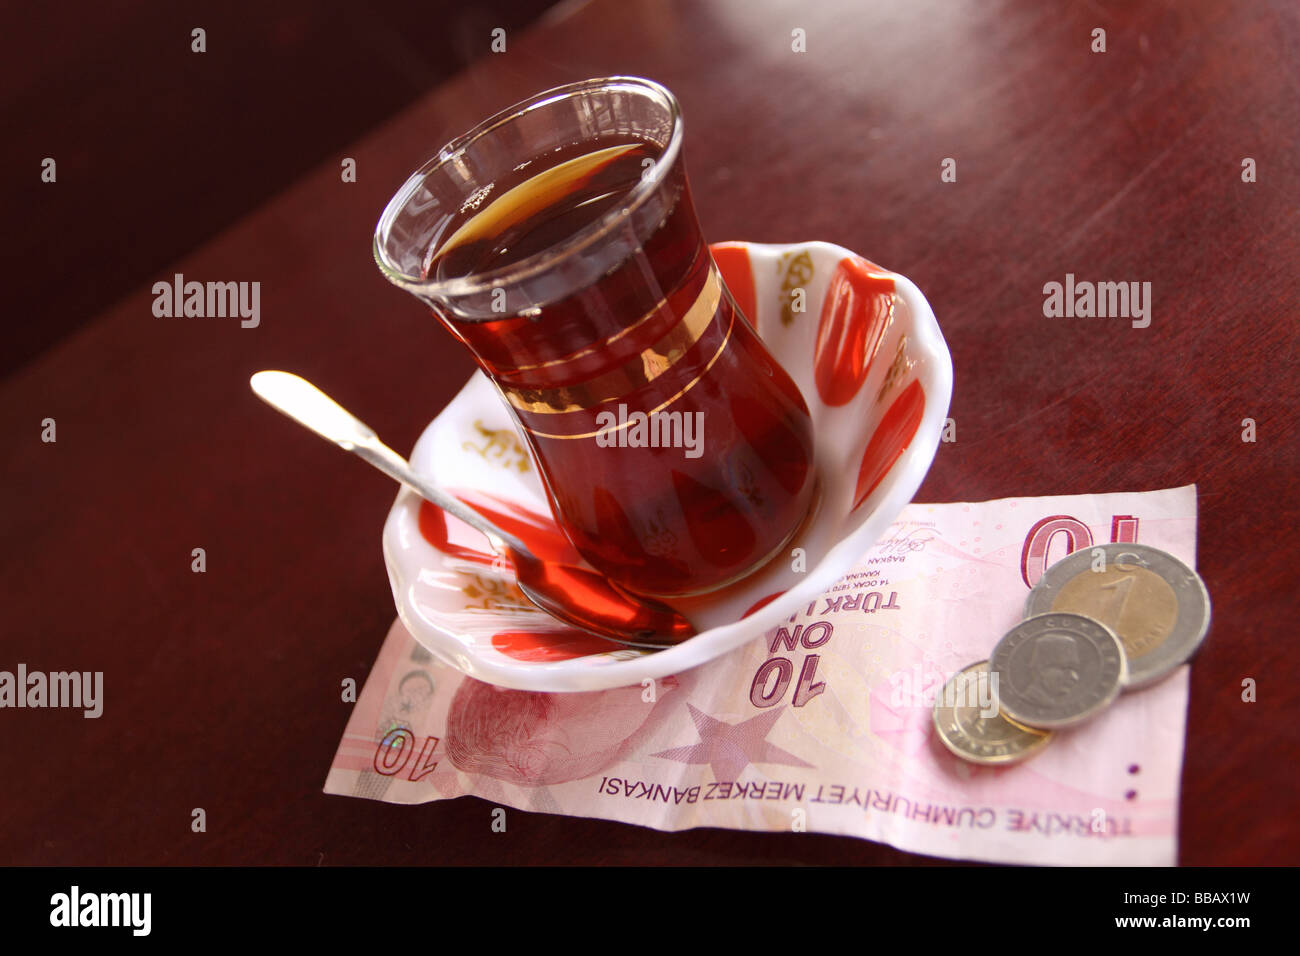 Turkey Turkish glass of hot tea the national drink known as Cay in Istanbul cafe Stock Photo